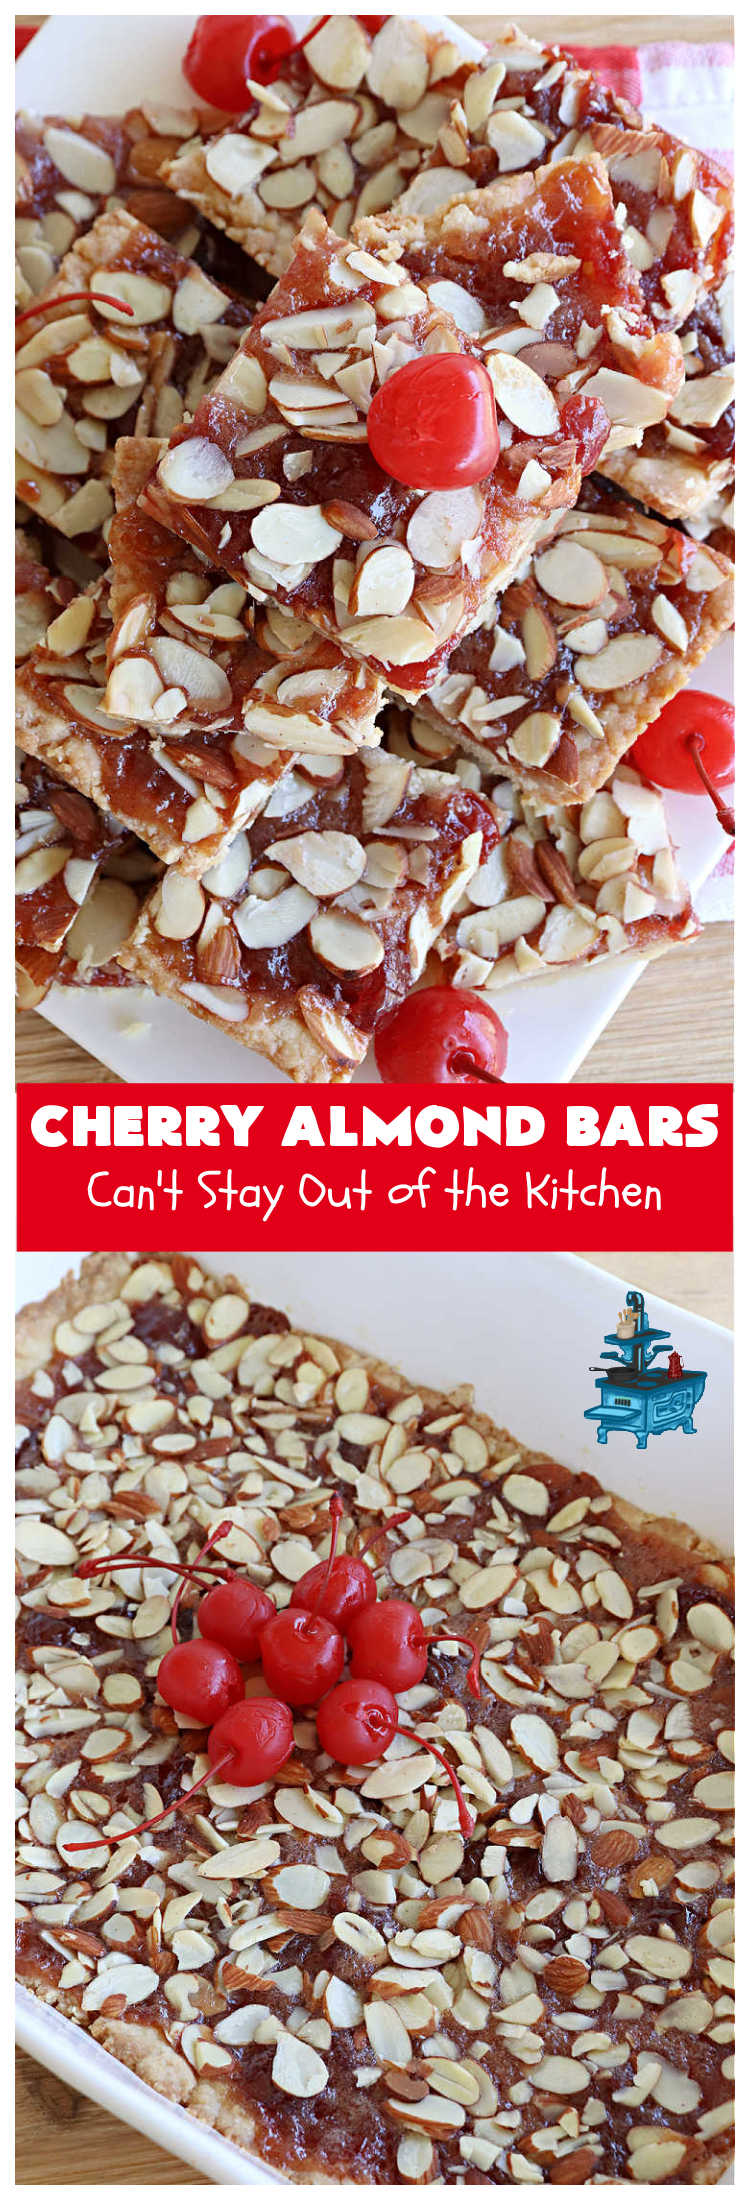 Cherry Almond Bars | Can't Stay Out of the Kitchen | these fantastic #Cherry #cookies use a #shortbread crust, #CherryPreserves in the filling & then they're topped with #almonds for a scrumptious treat everyone will enjoy. Great for #tailgating parties, #holiday #baking & a #ChristmasCookieExchange. #dessert #CherryDessert #CherryAlmondBars